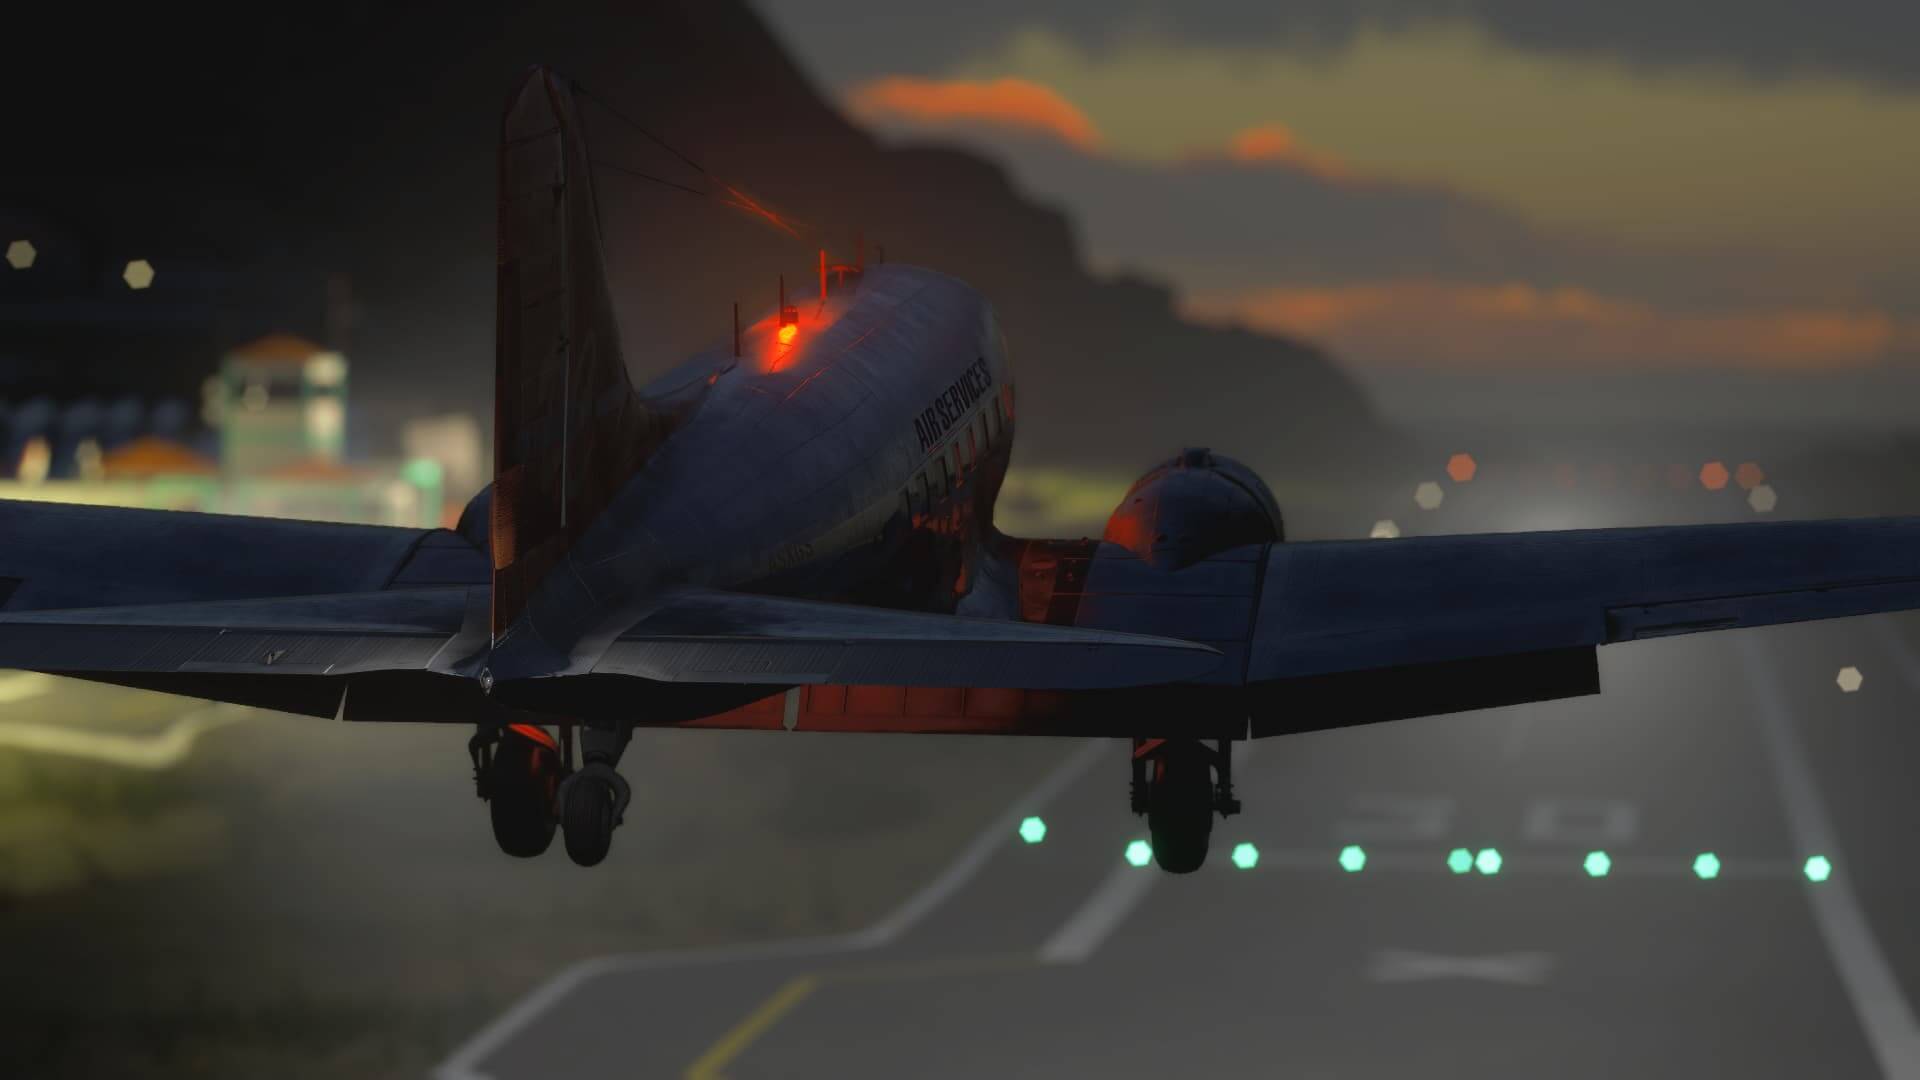 A DC-3 with beacon light flashing passes over the threshold of runway 30 at Saba airport.